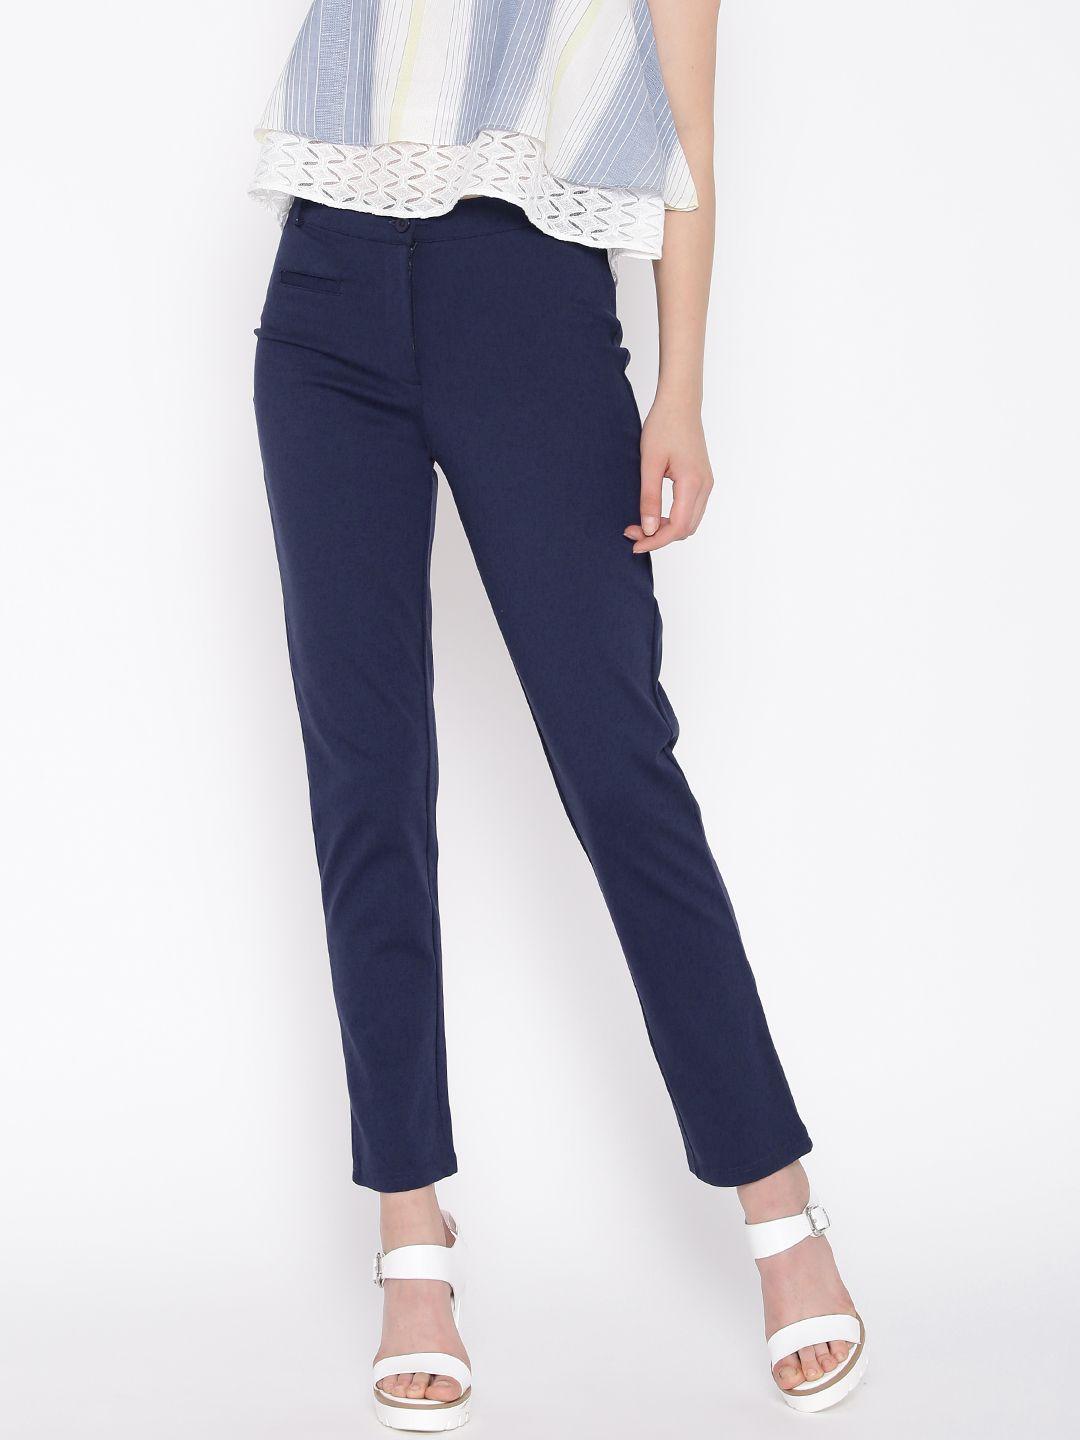 and-women-navy-solid-regular-fit-trousers